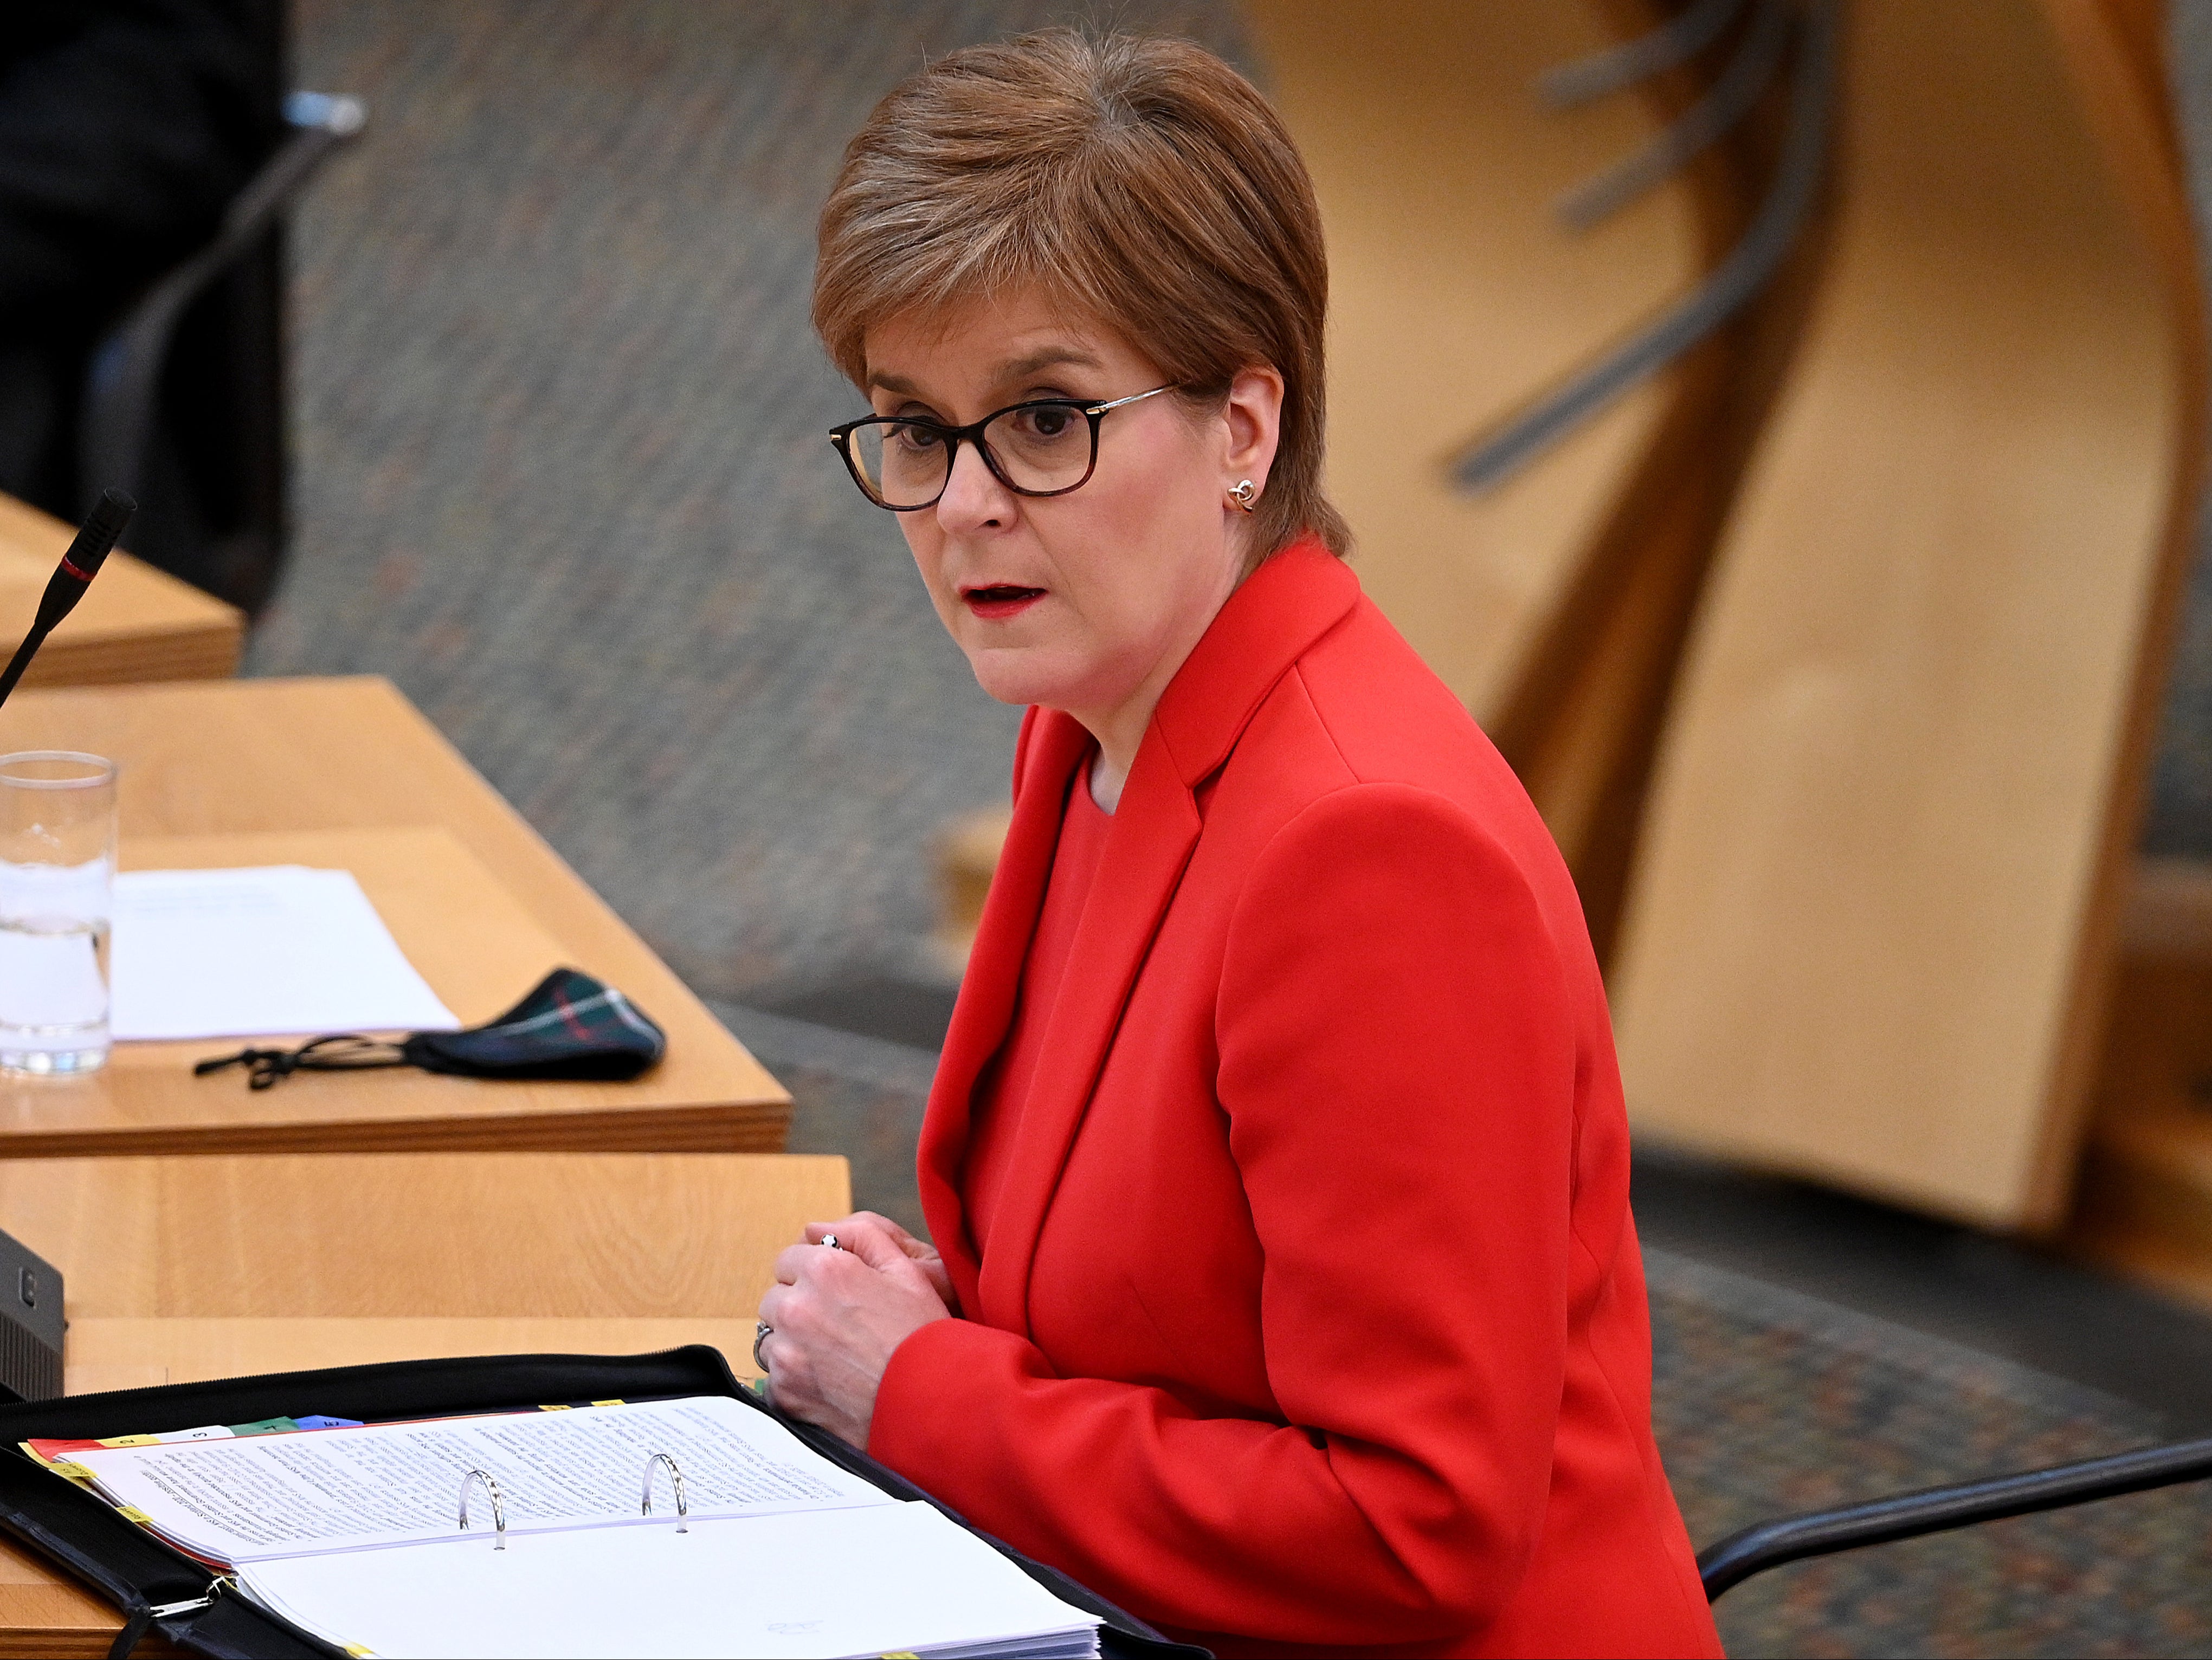 Details will be released weekly, Sturgeon says